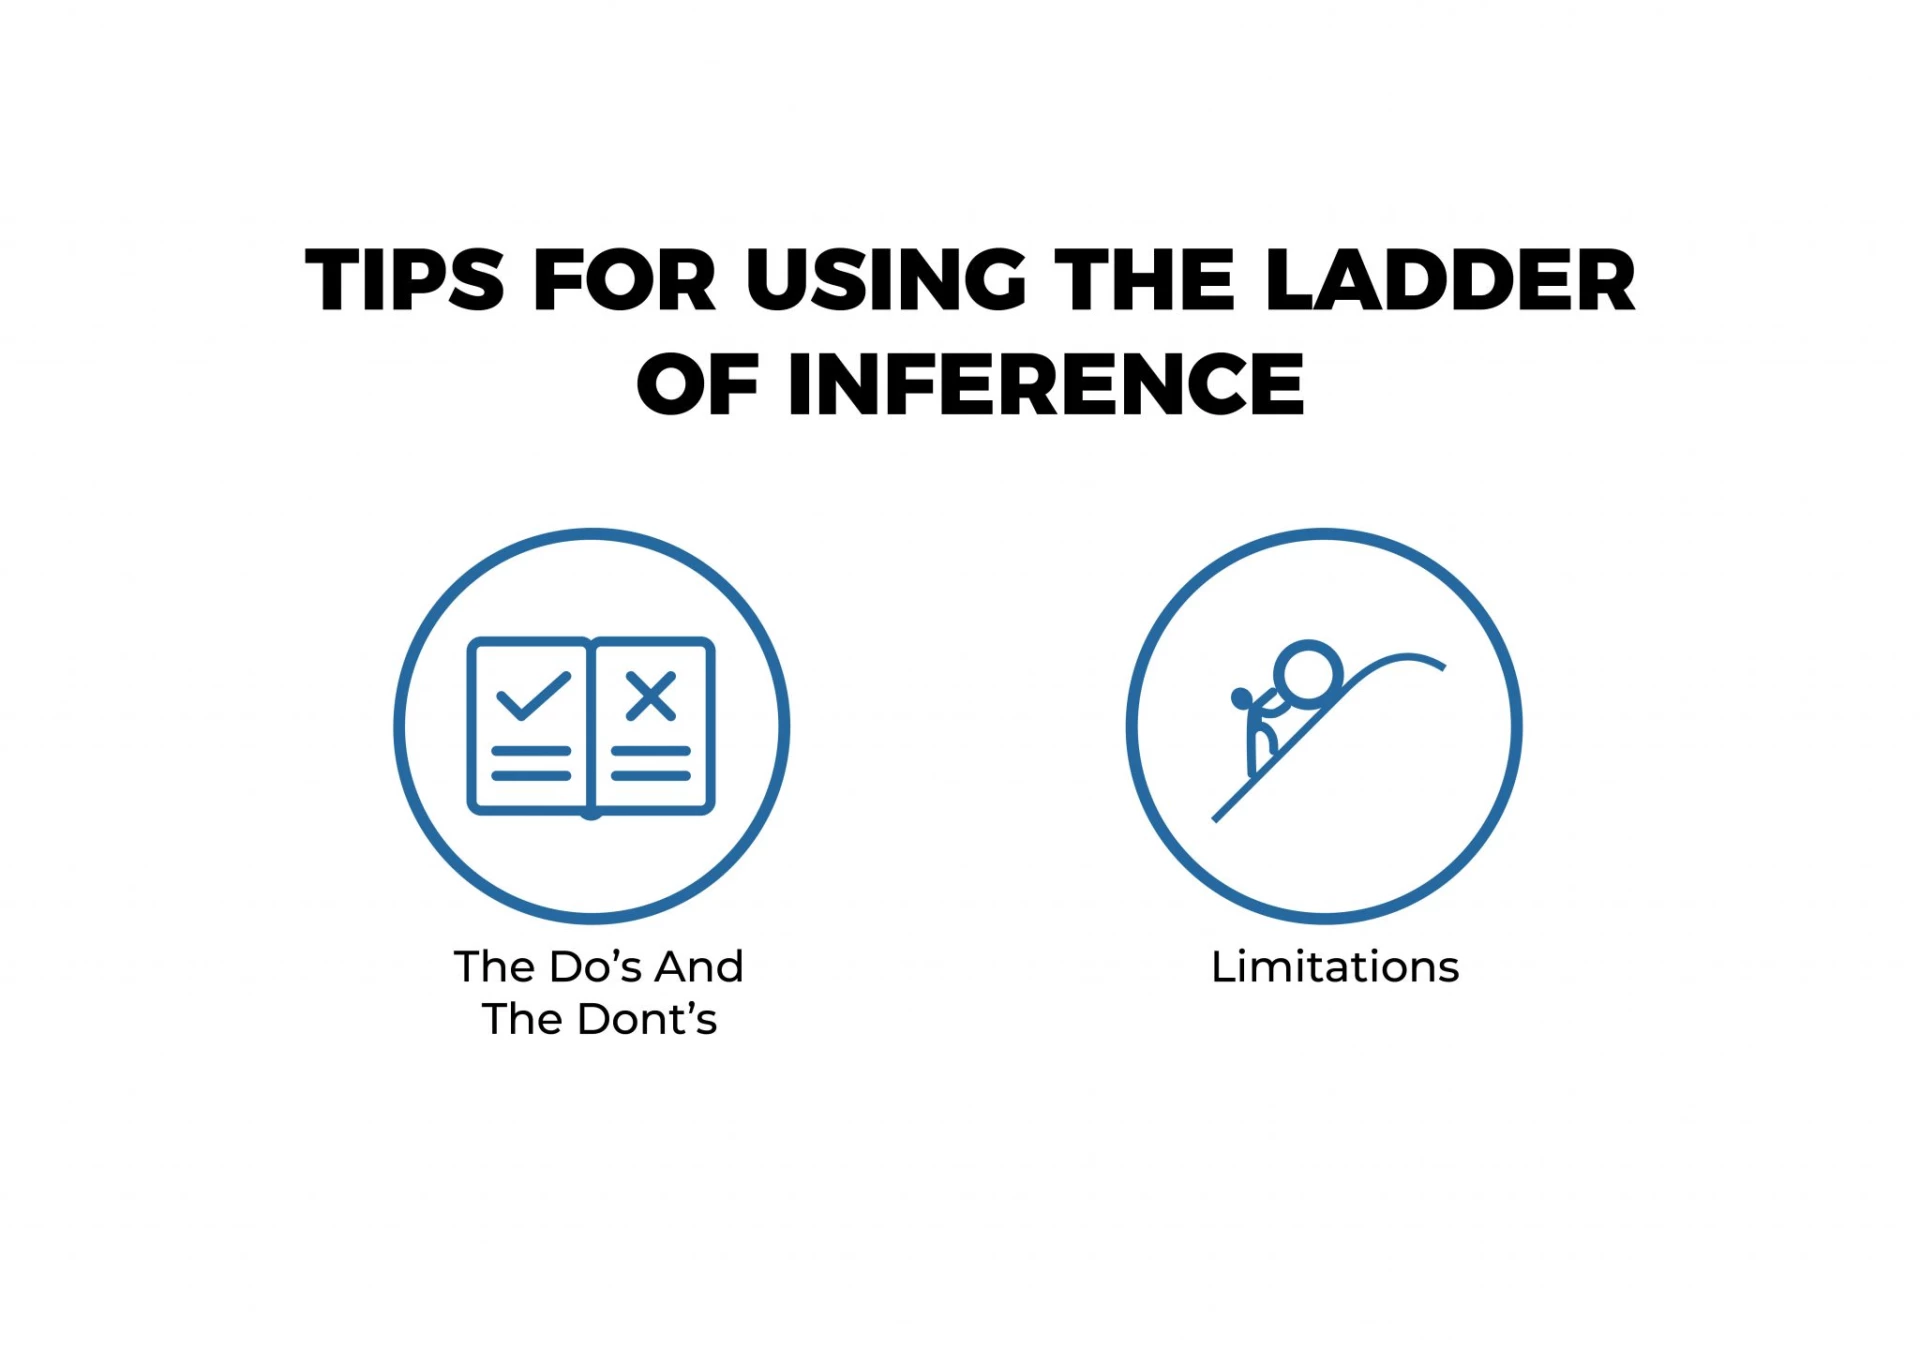 TIPS FOR USING THE LADDER OF INFERENCE